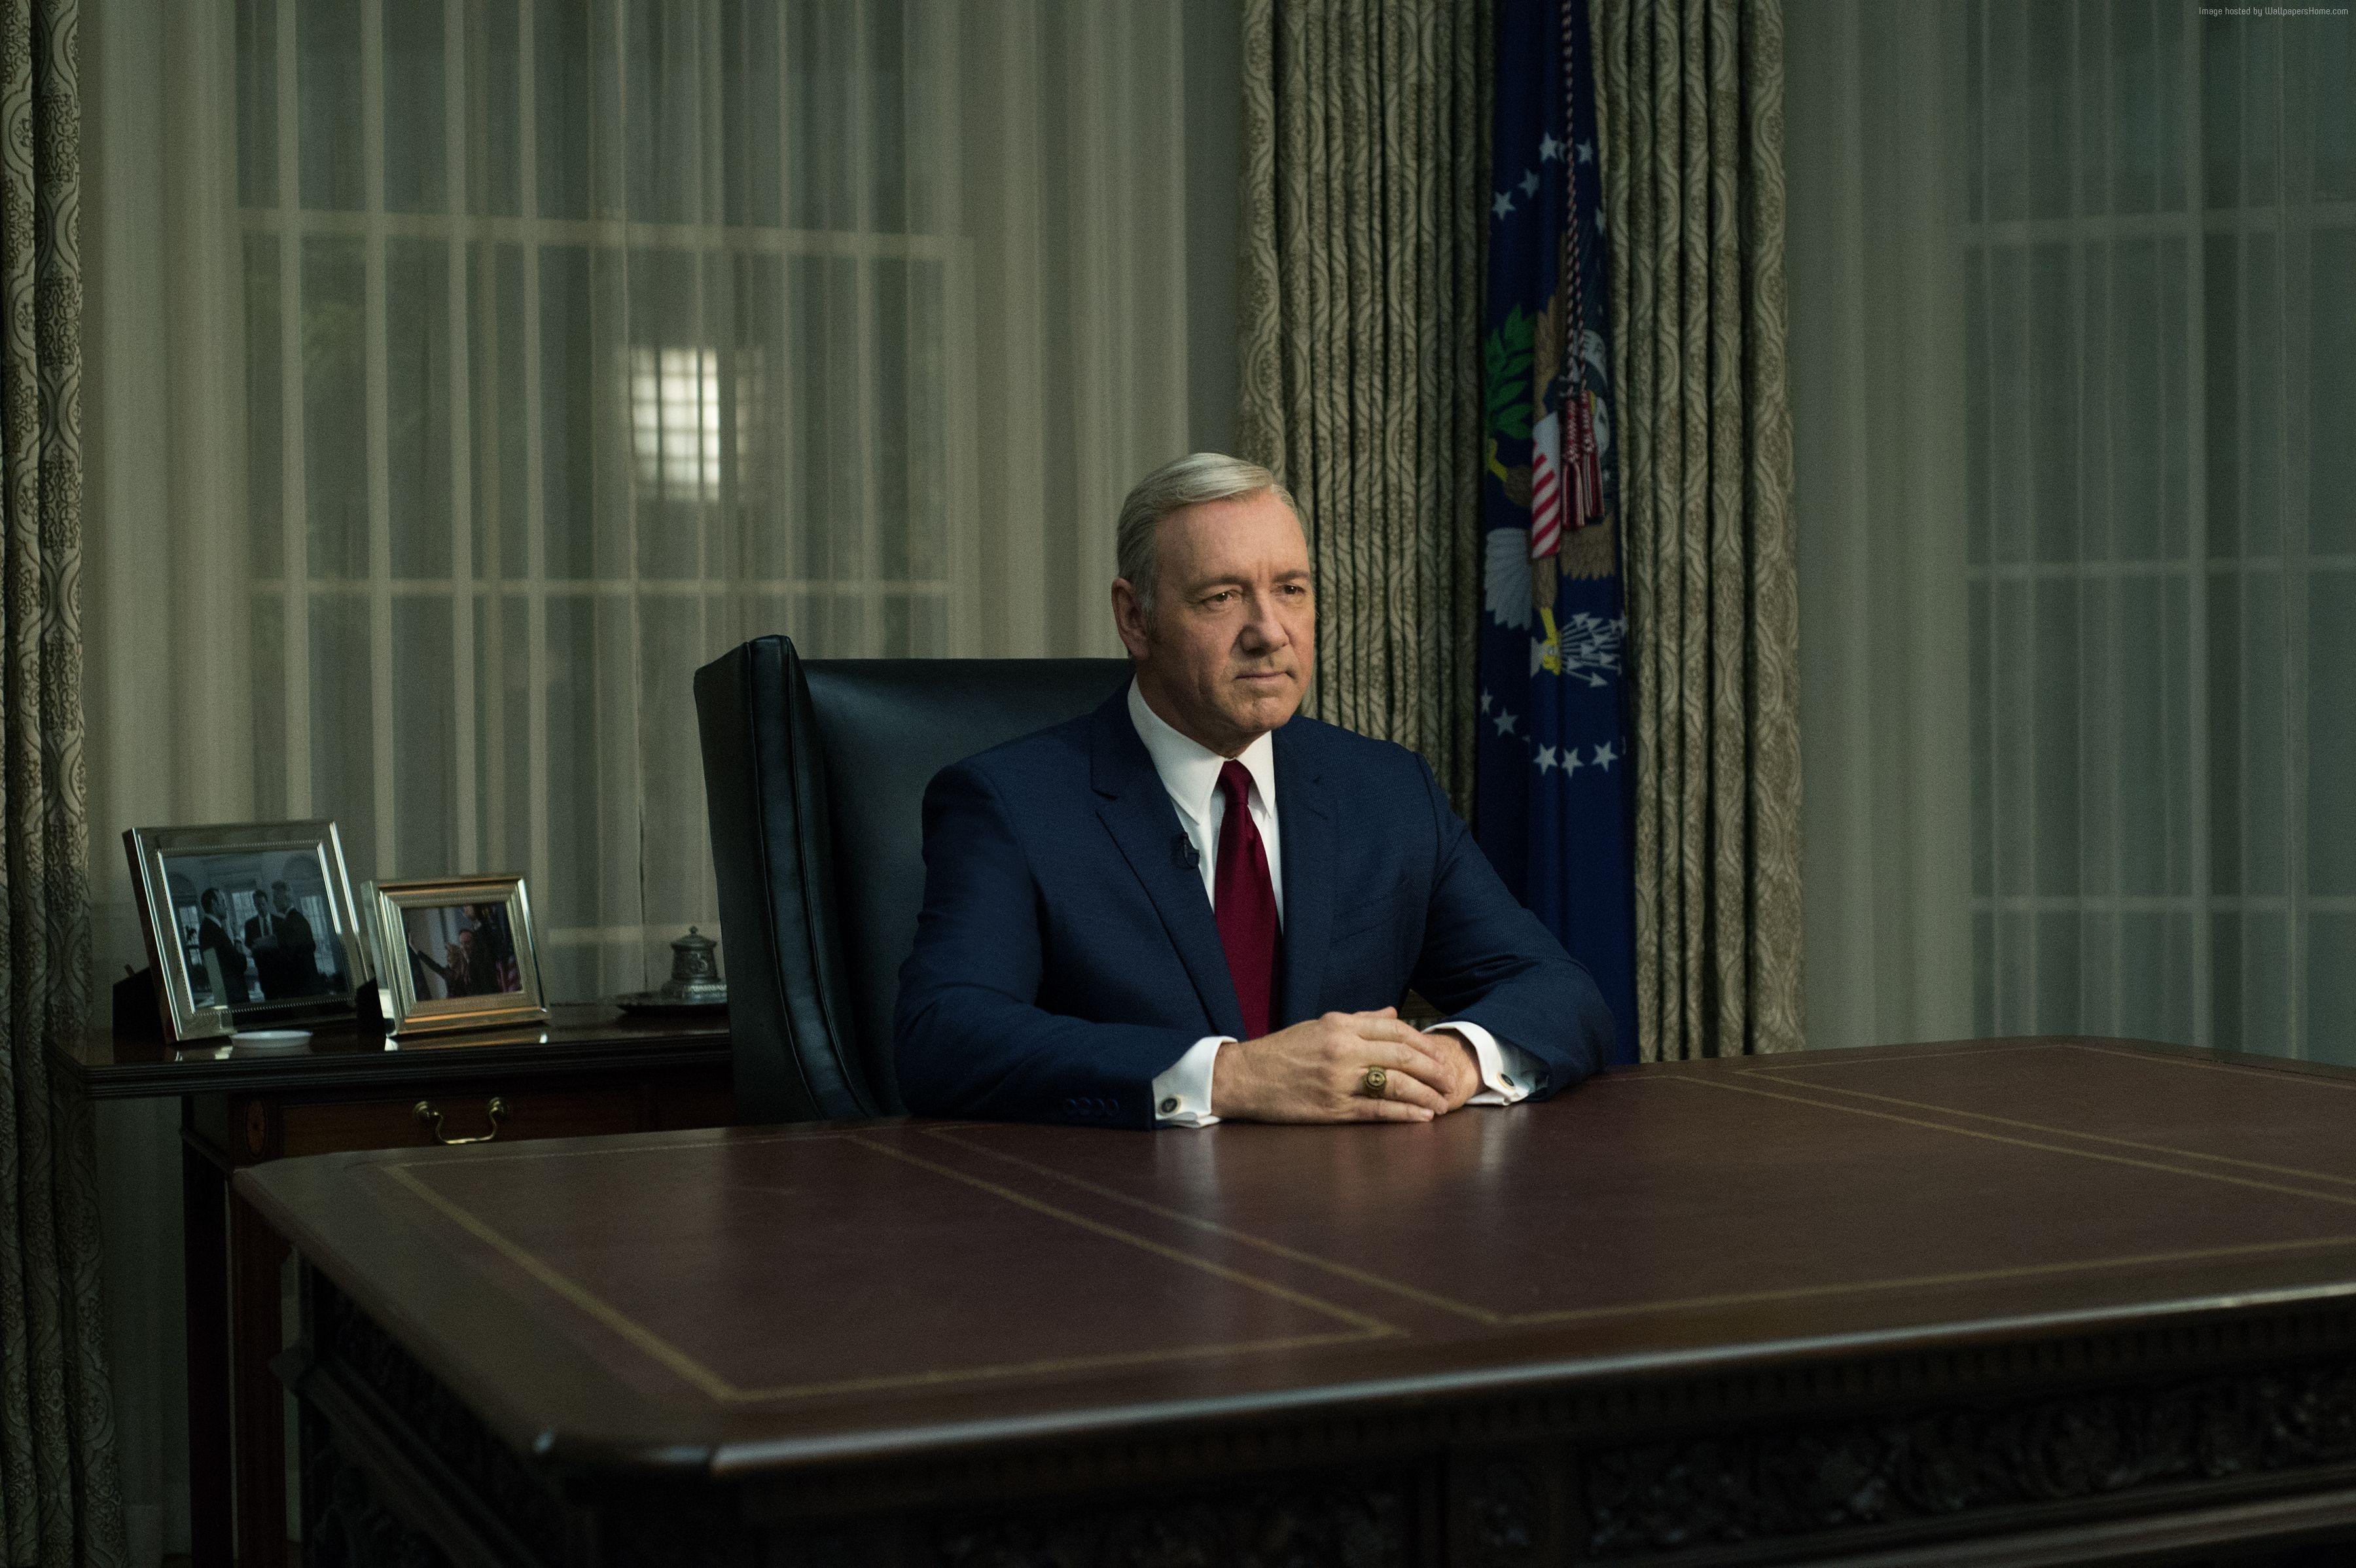 House of Cards Wallpaper, Movies / Drama: House of Cards, Best TV